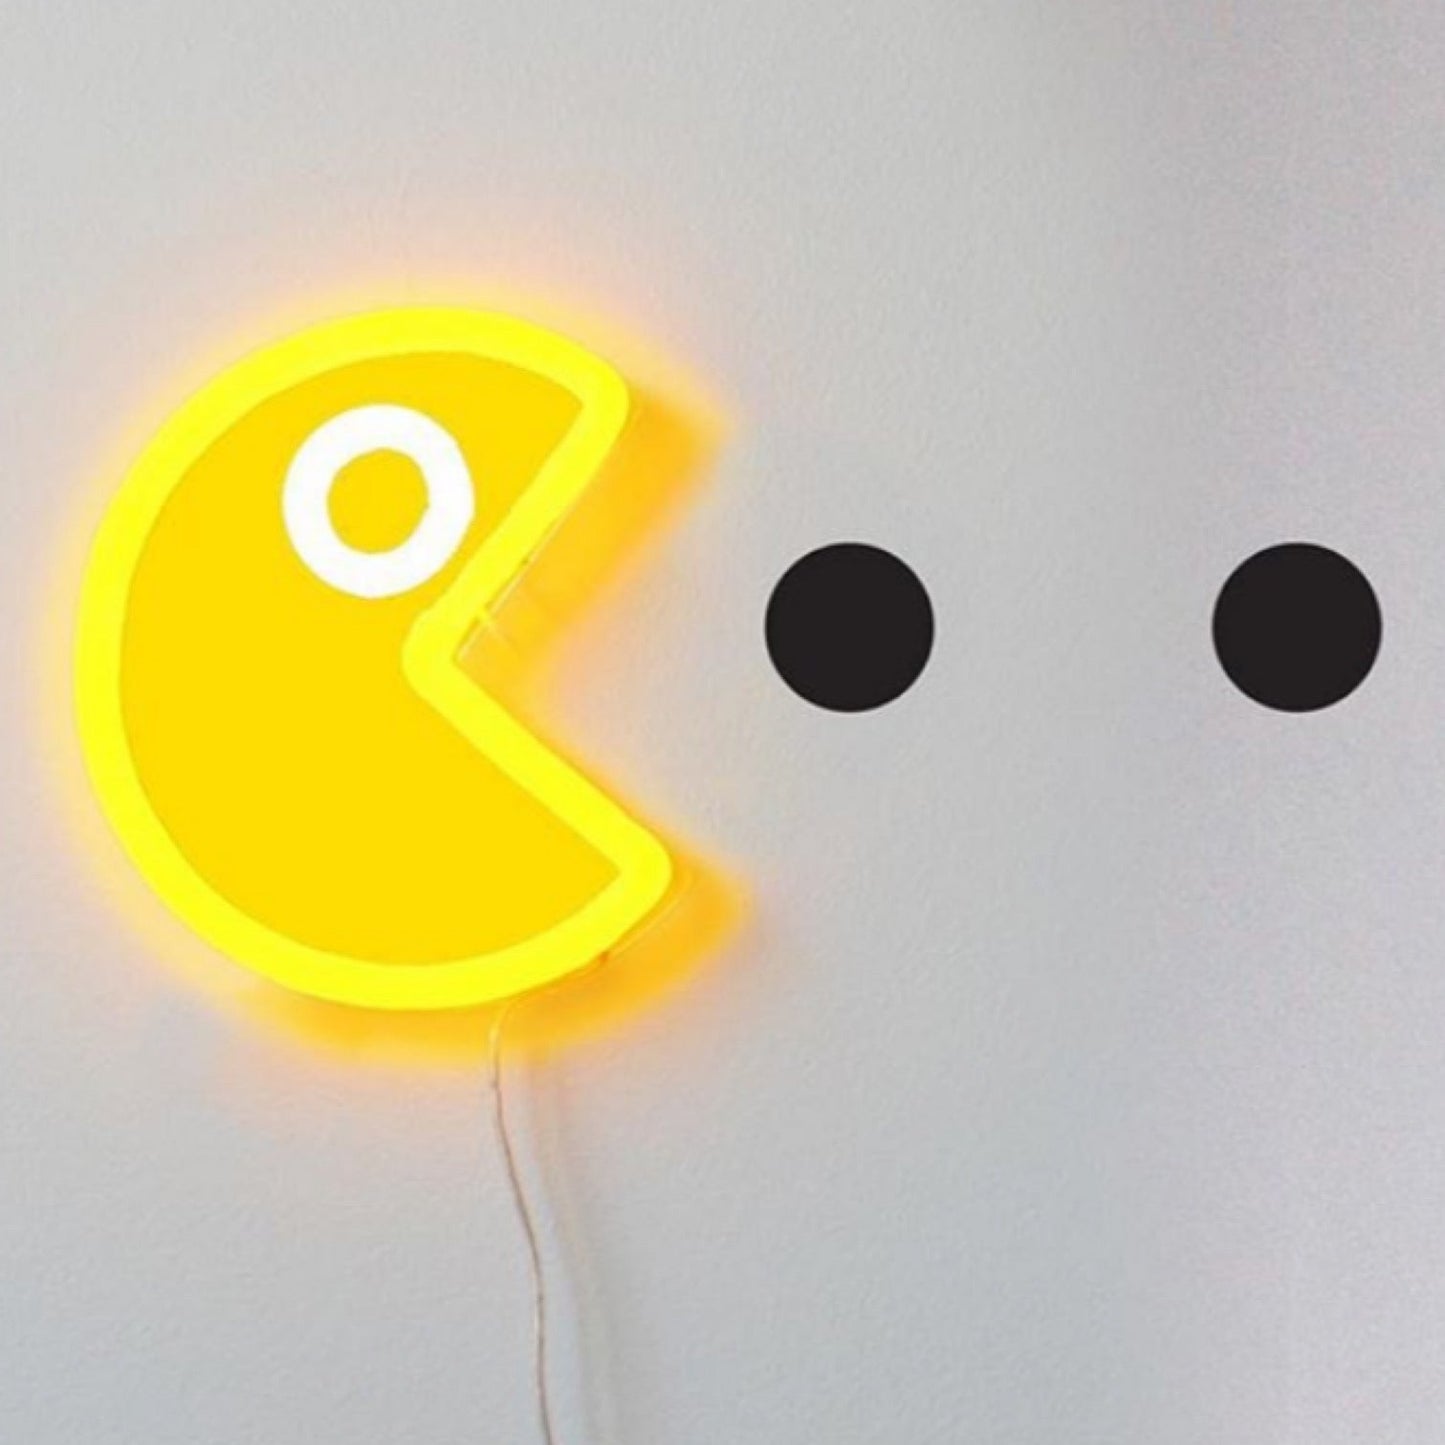 Packman neon sign